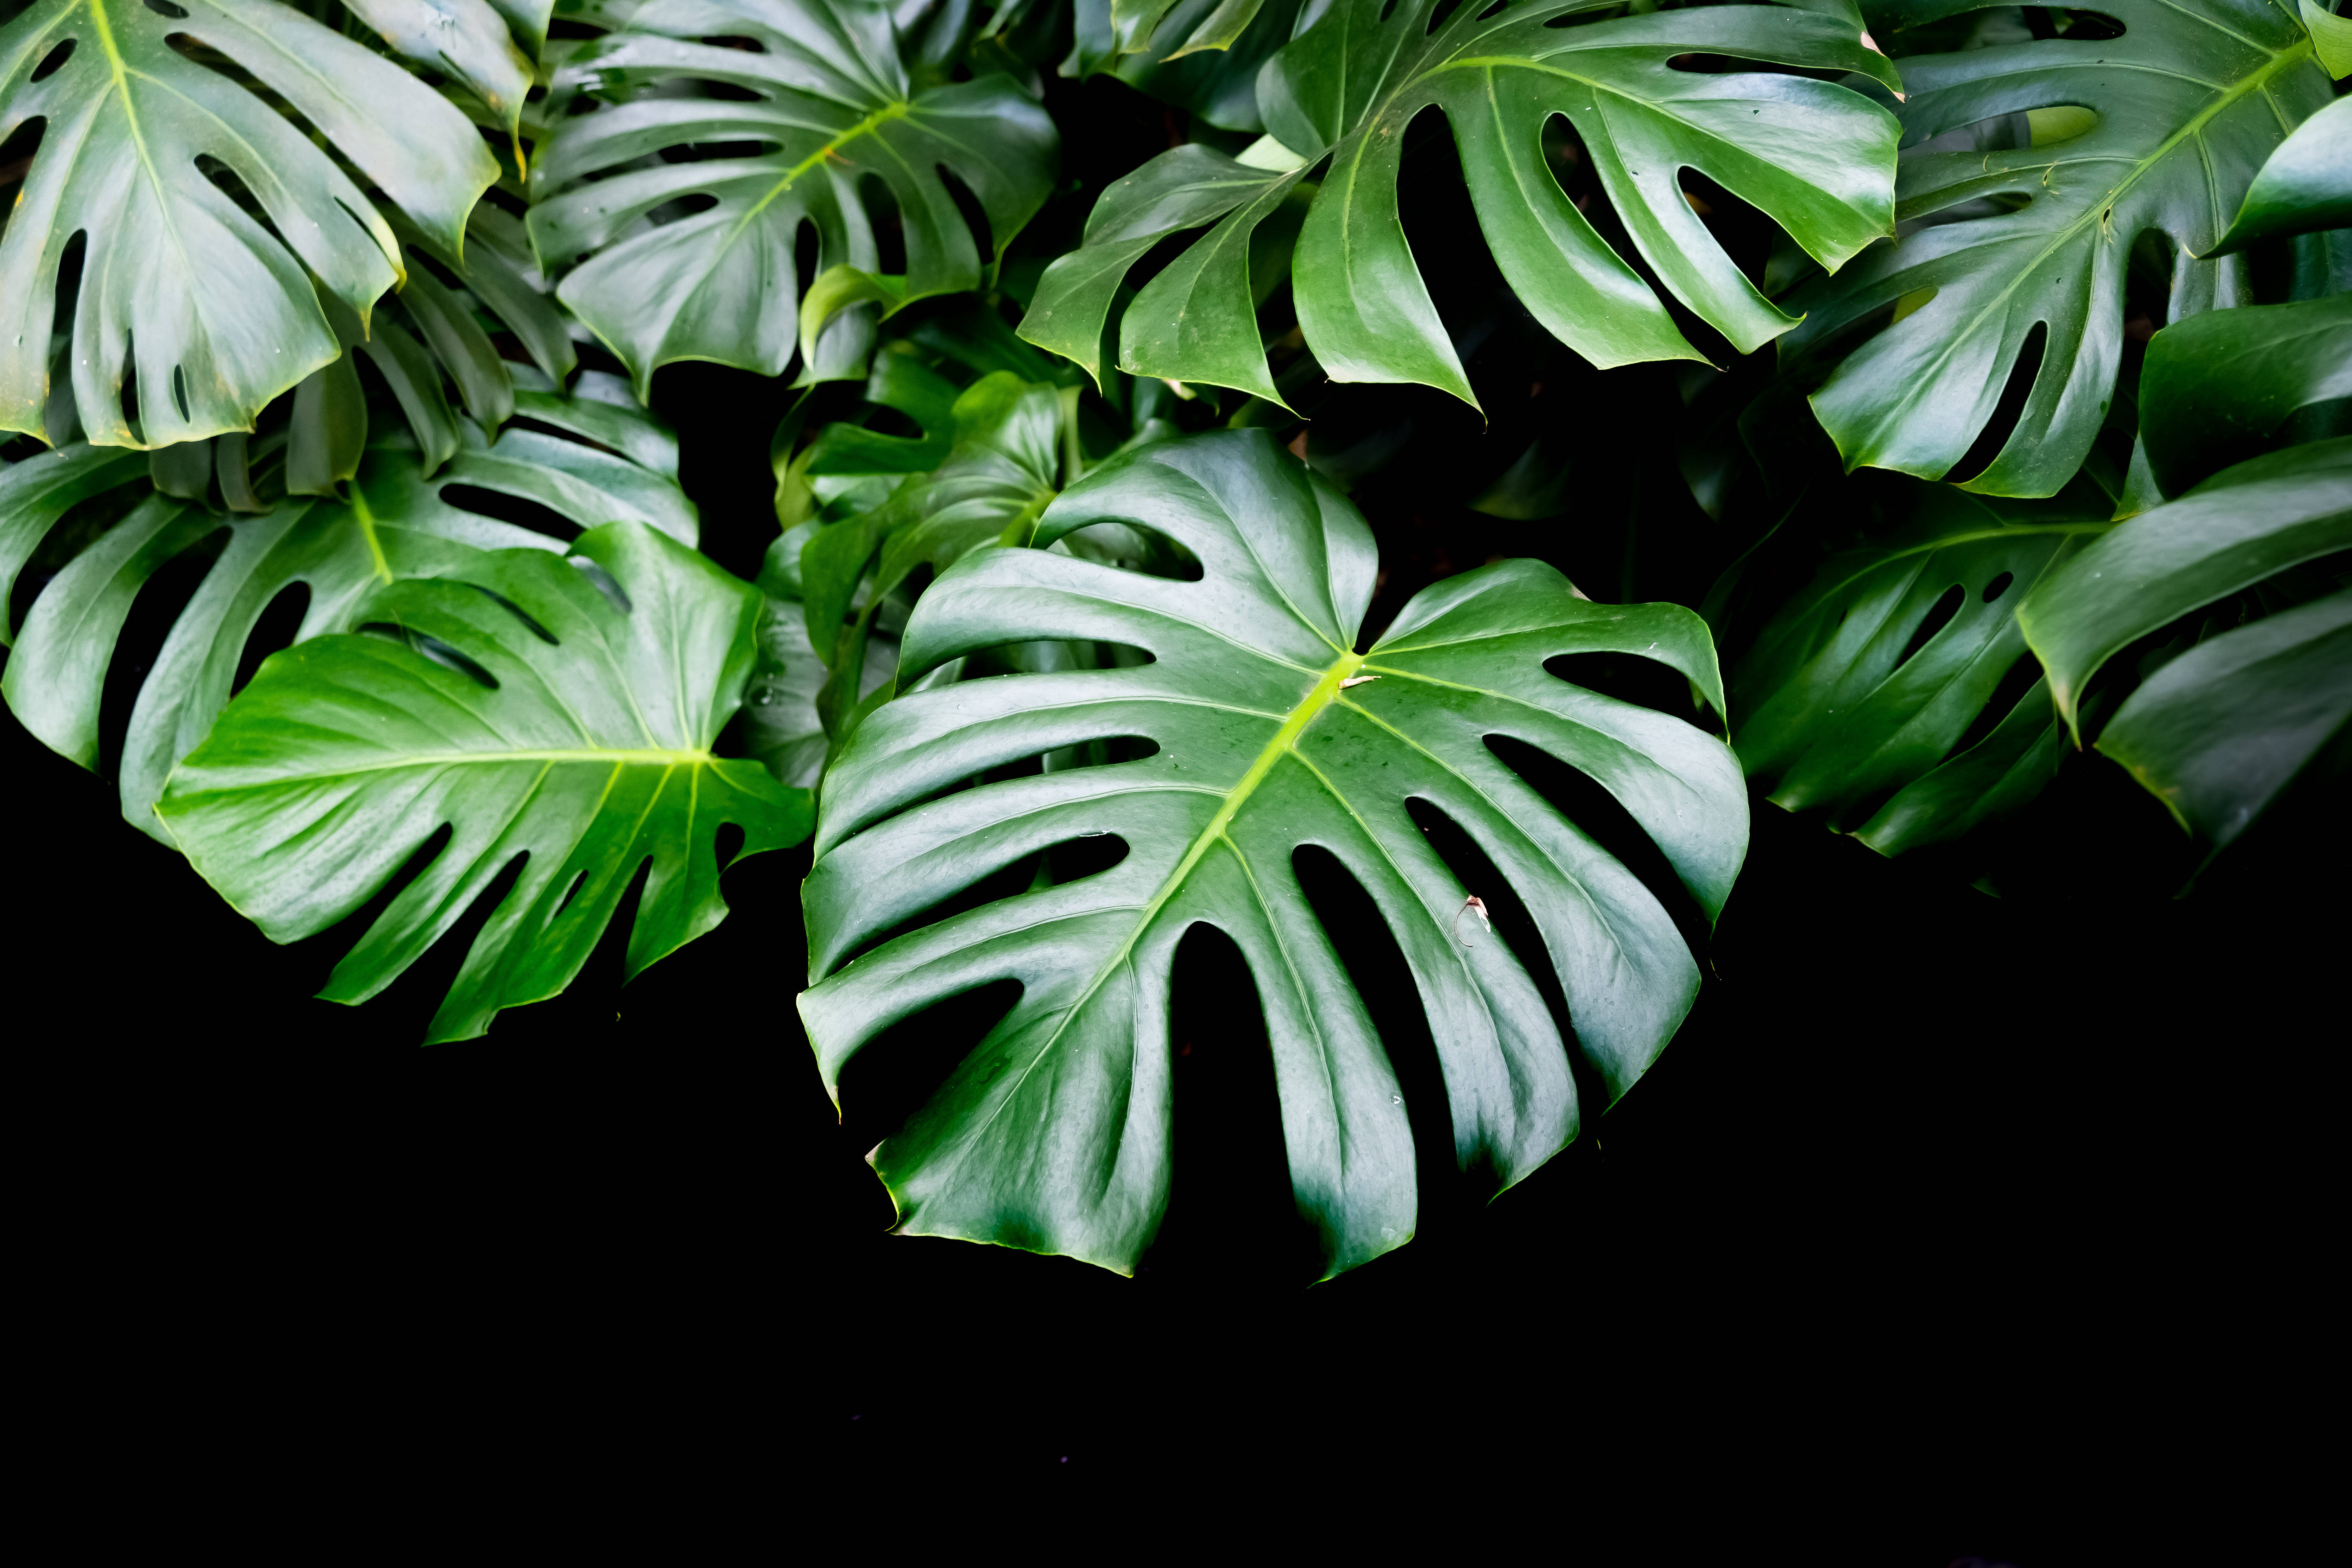 A large green leafy plant is on display - Monstera